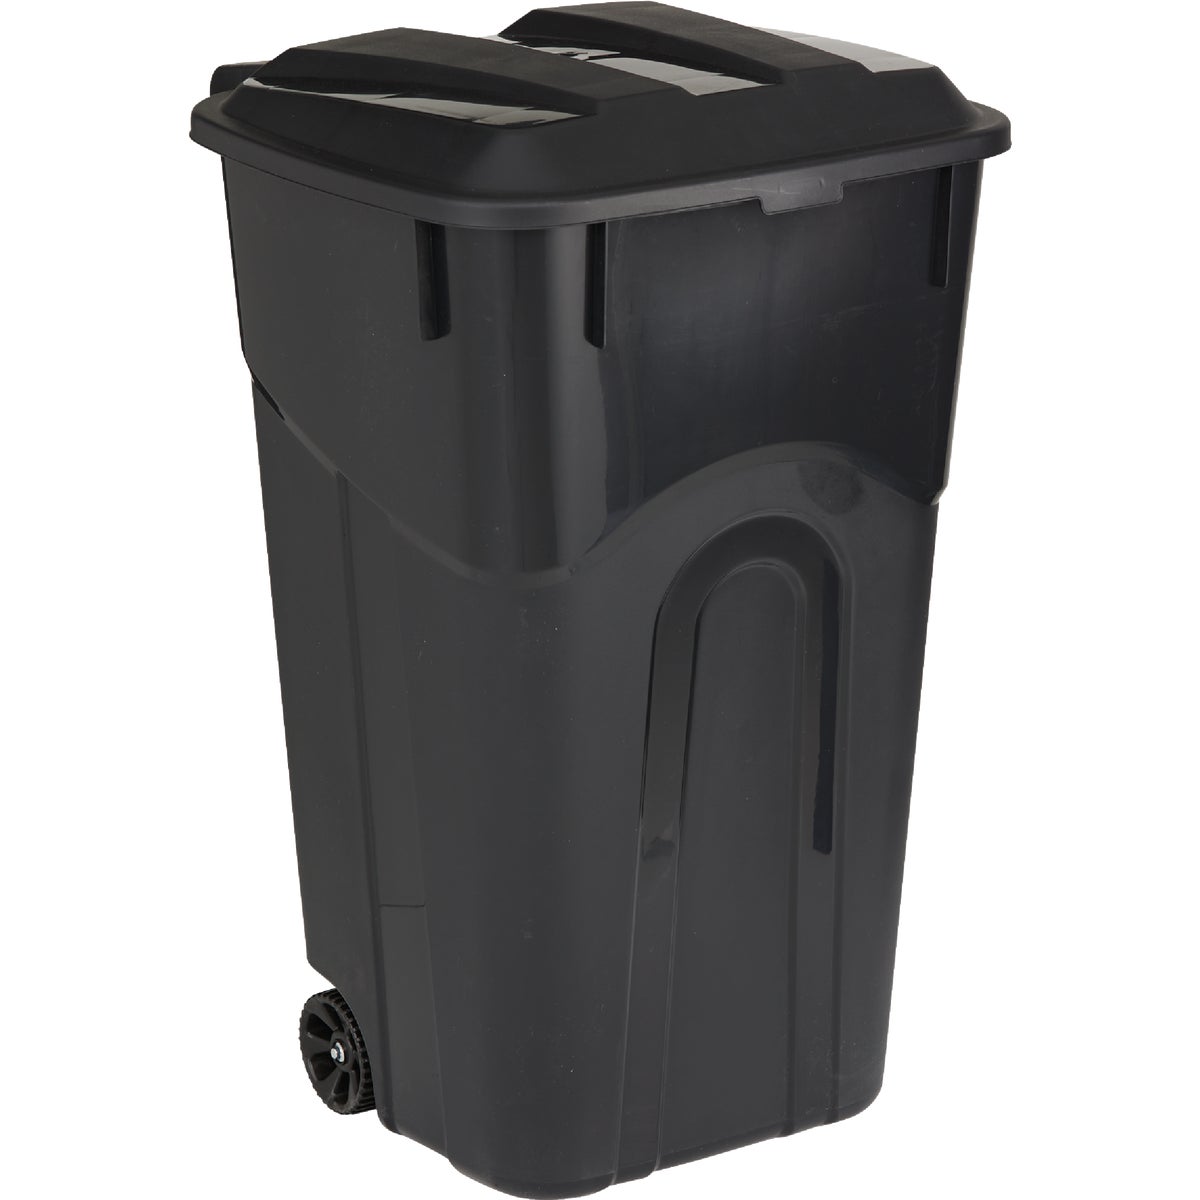 United Solutions Rough and Rugged 32 Gal. Wheeled Trash Can with Attached Lid